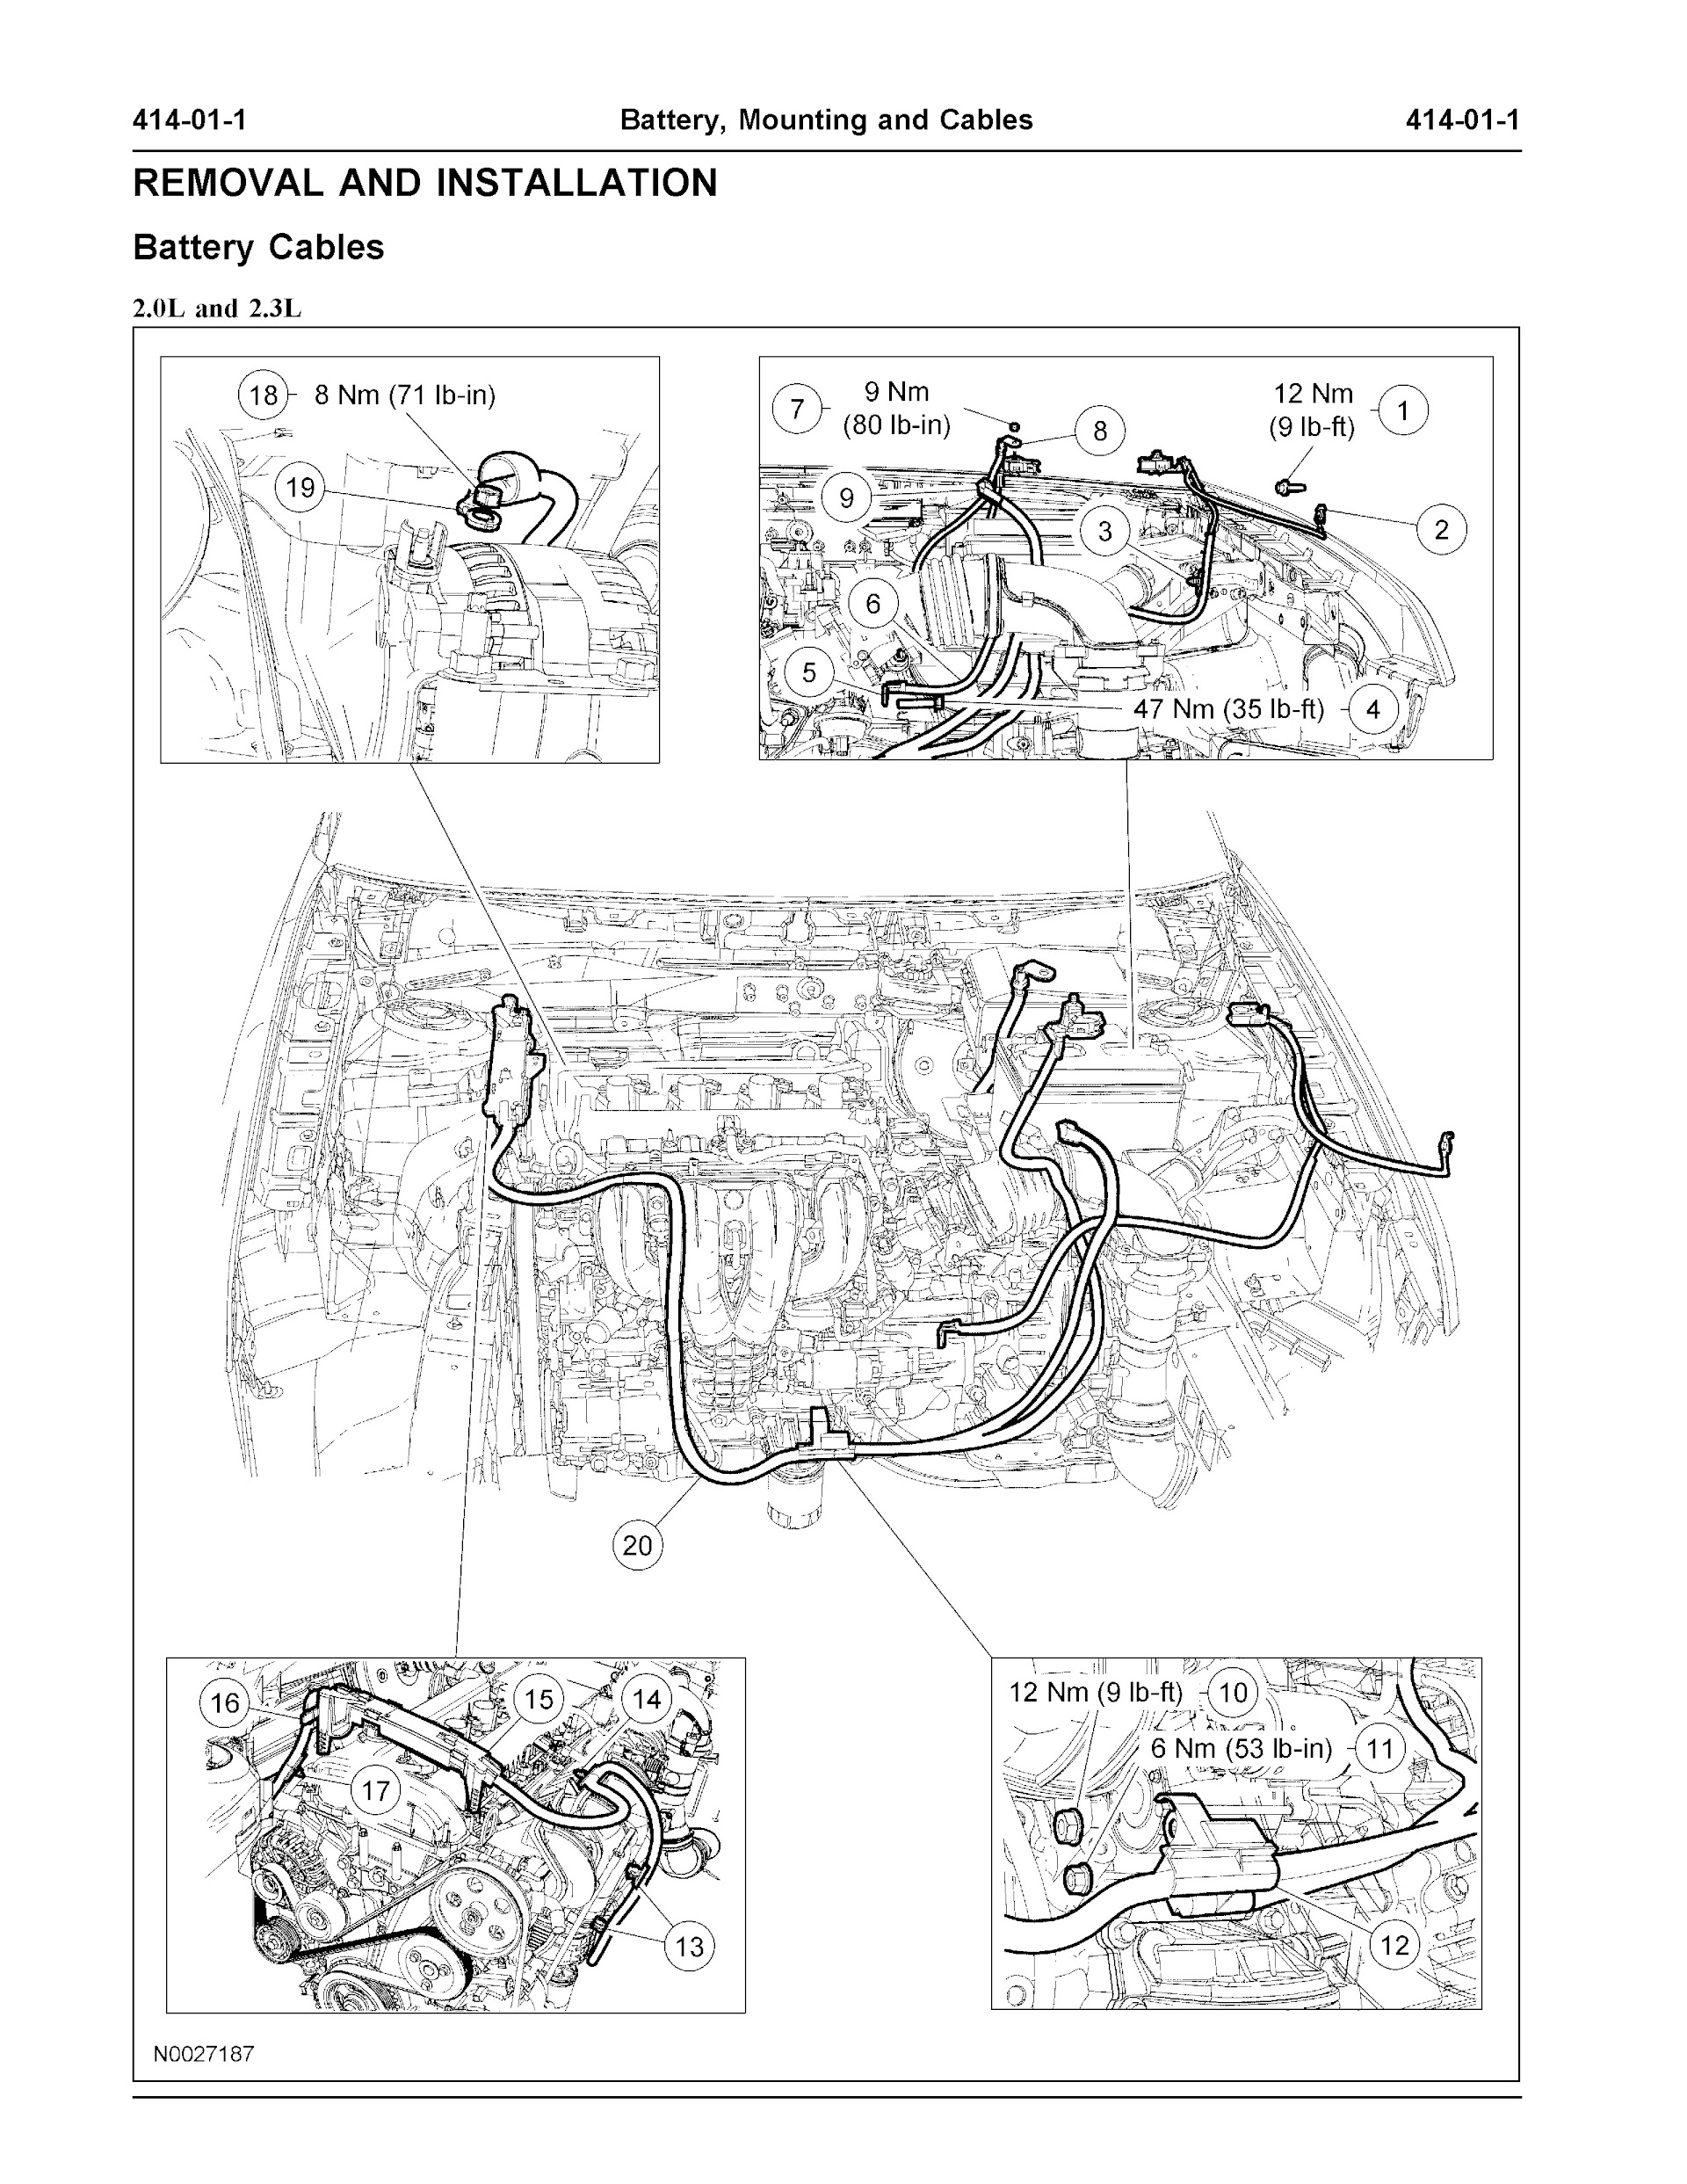 2011 Ford Focus Repair Manual Battery Mounting and Cables